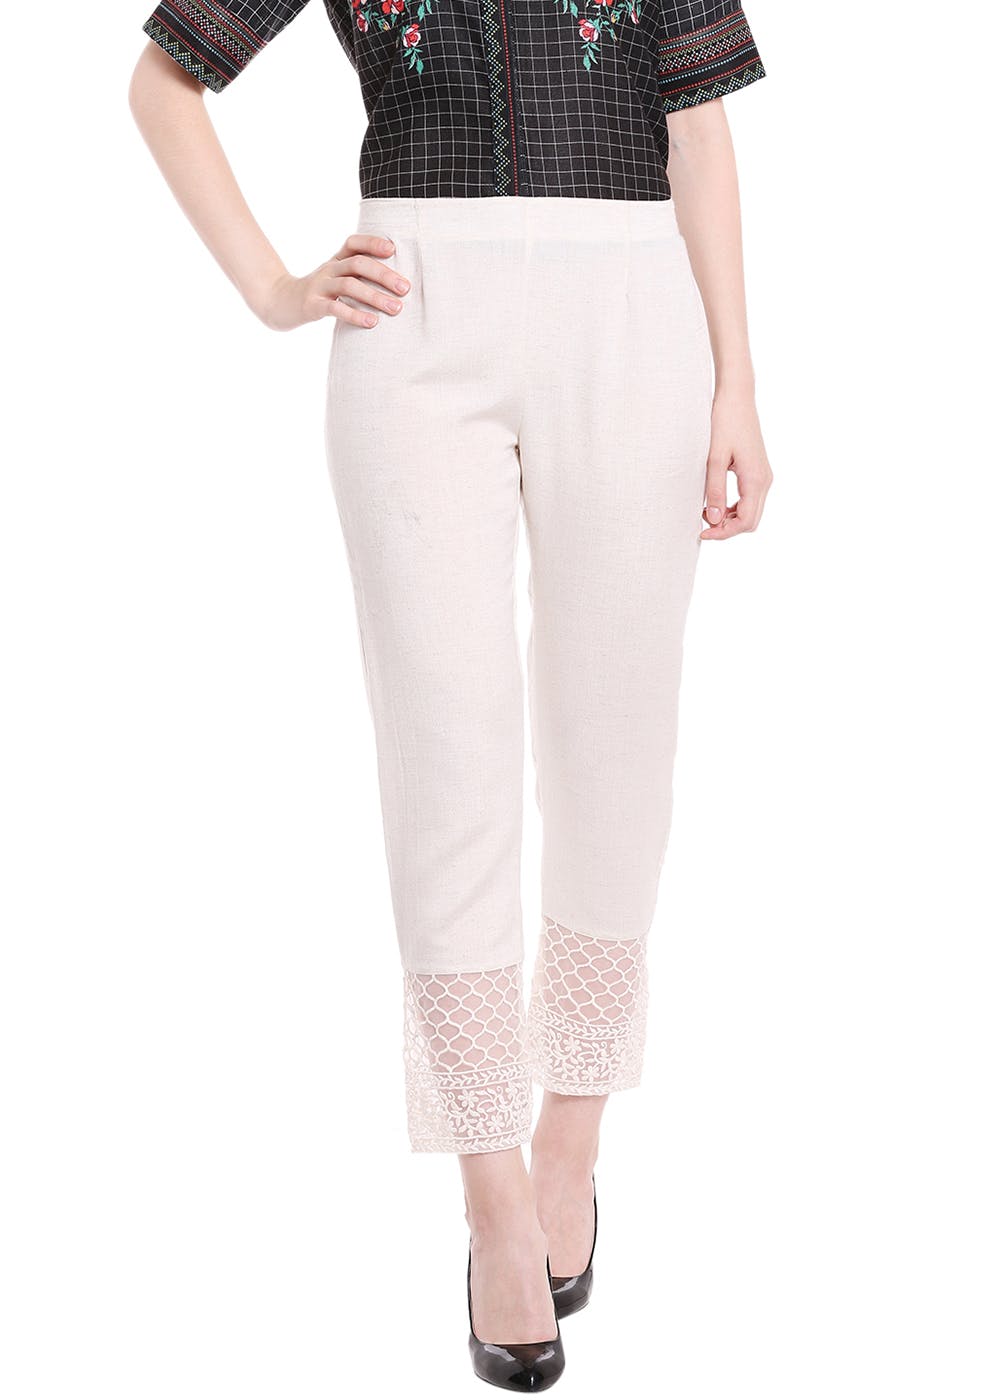 Buy White Cotton Pants With Grey Embroidery by Designer PINKSKY DESIGNS for  Women online at Ogaanmarketcom